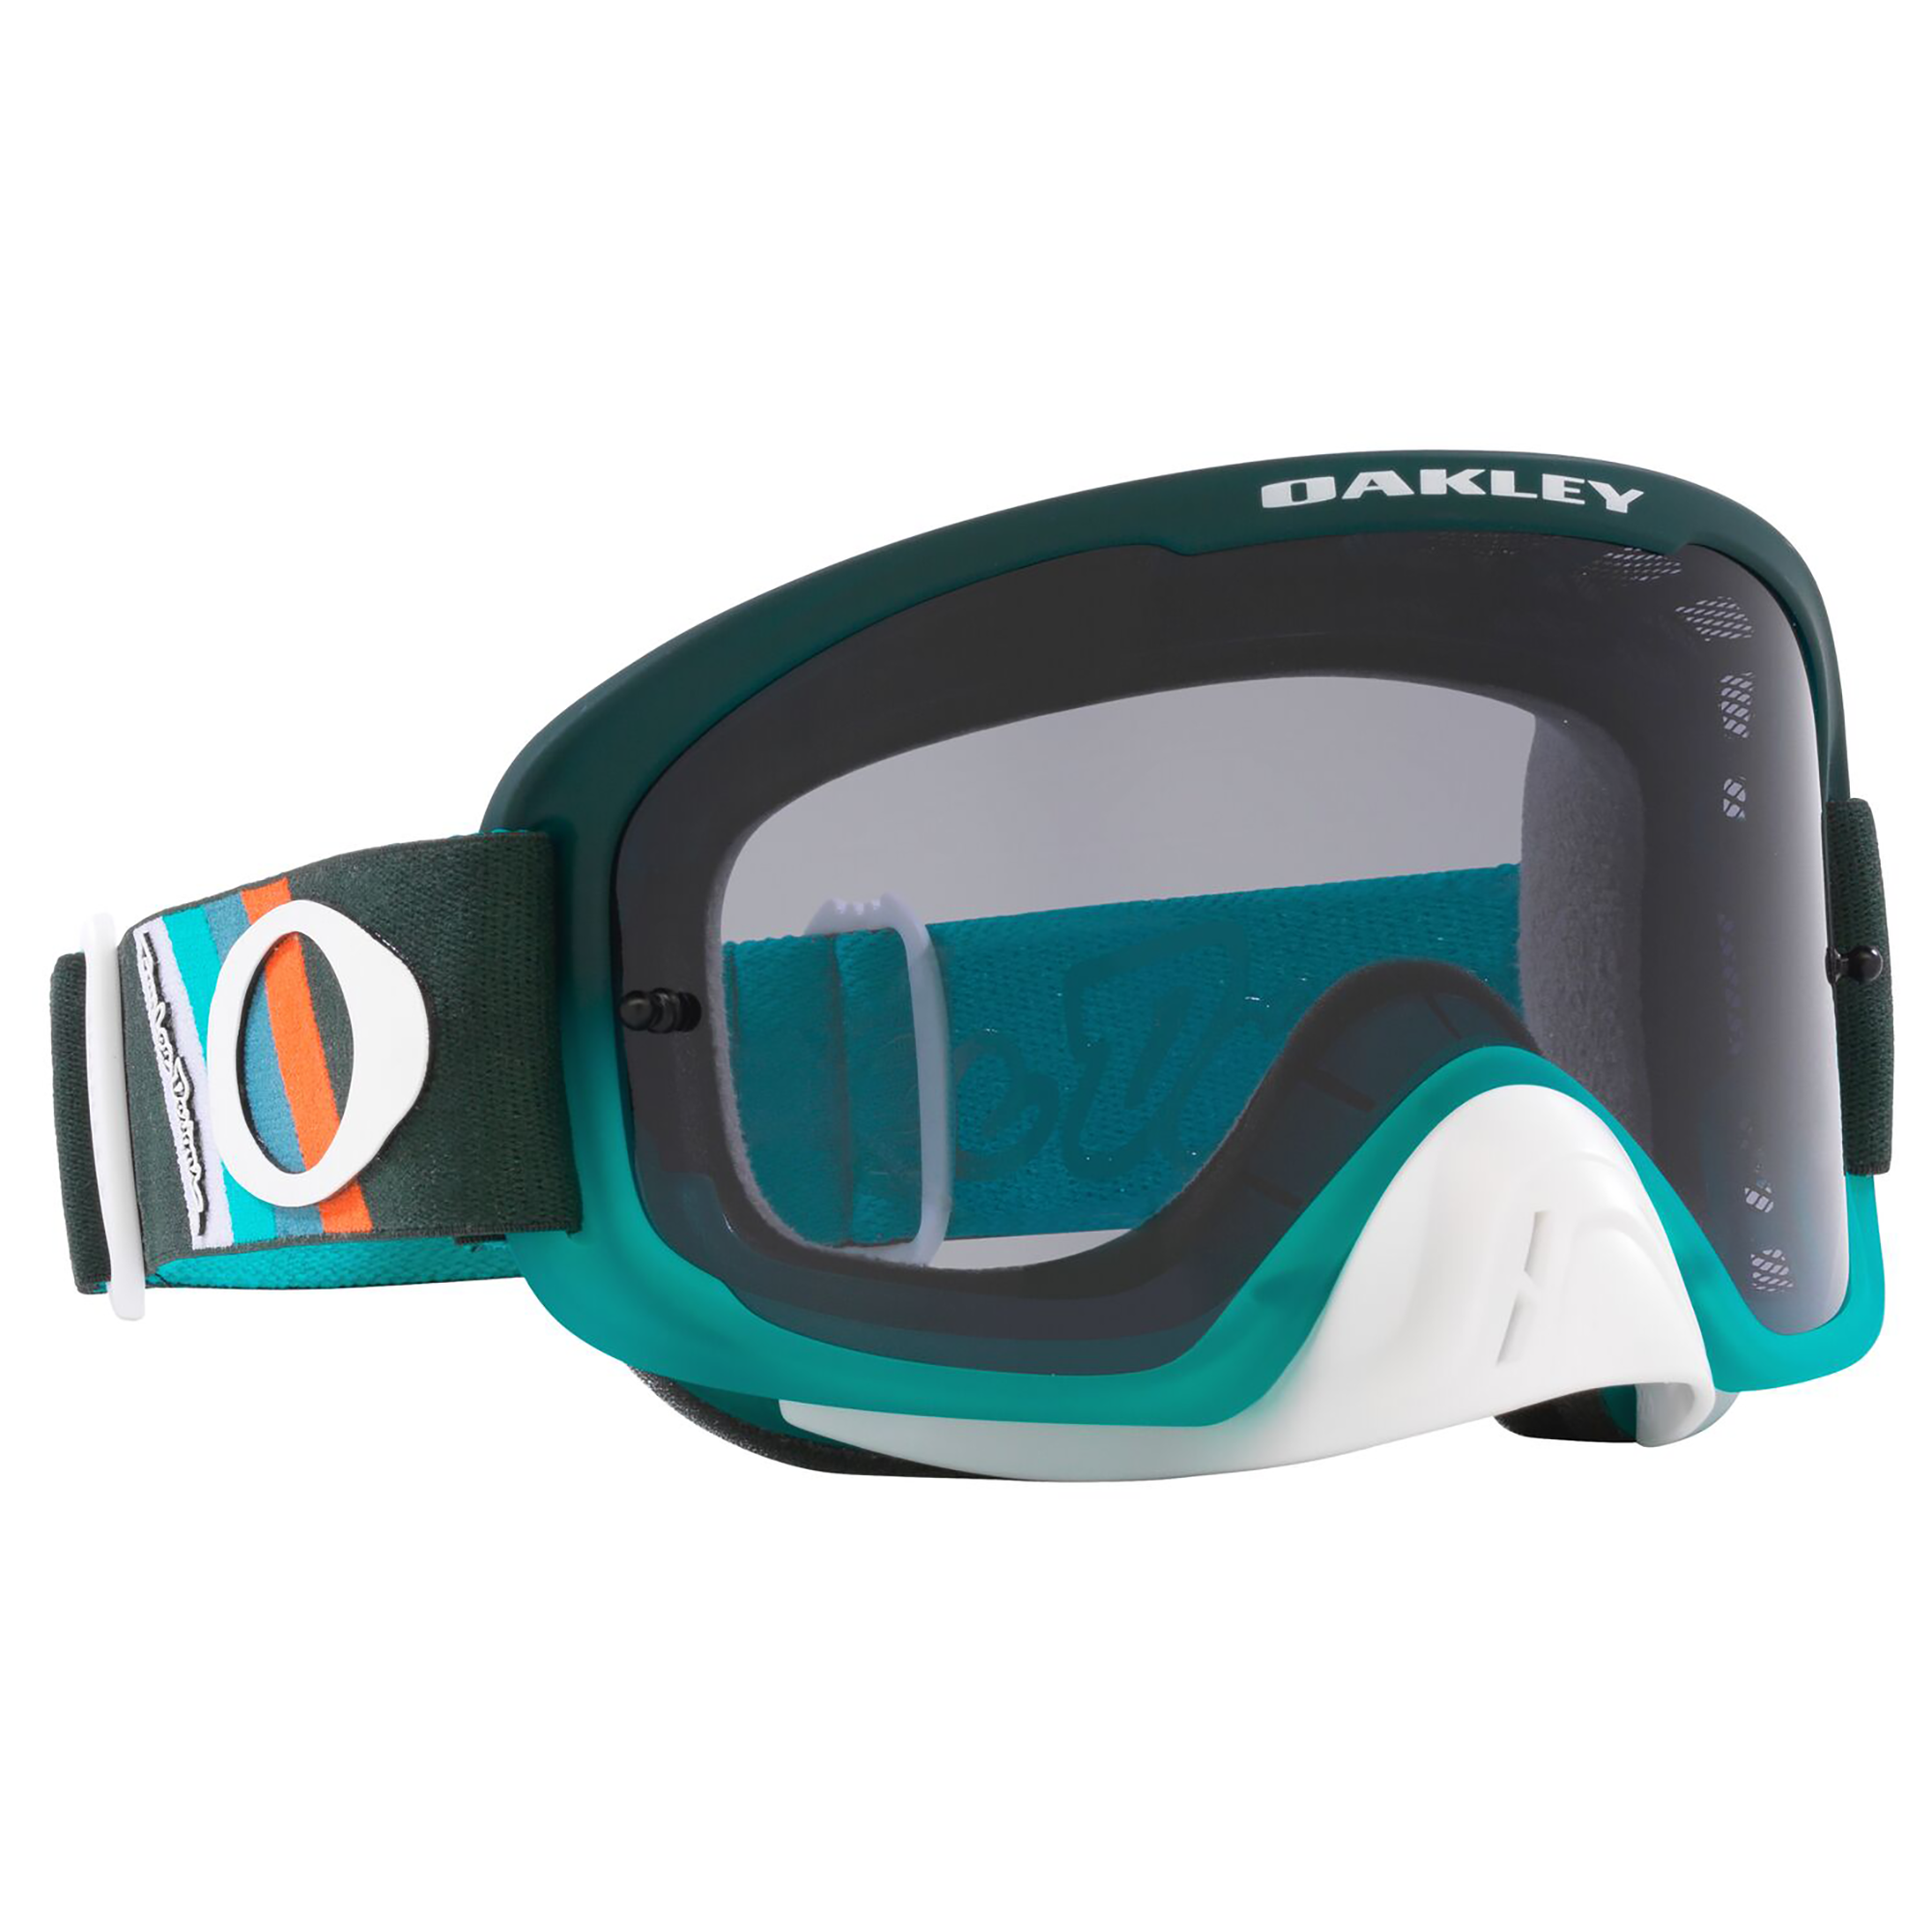 Oakley O Frame 2.0 Pro TLD Collection MTB Goggle in Hunter Green Stripes with Dark Grey Lens